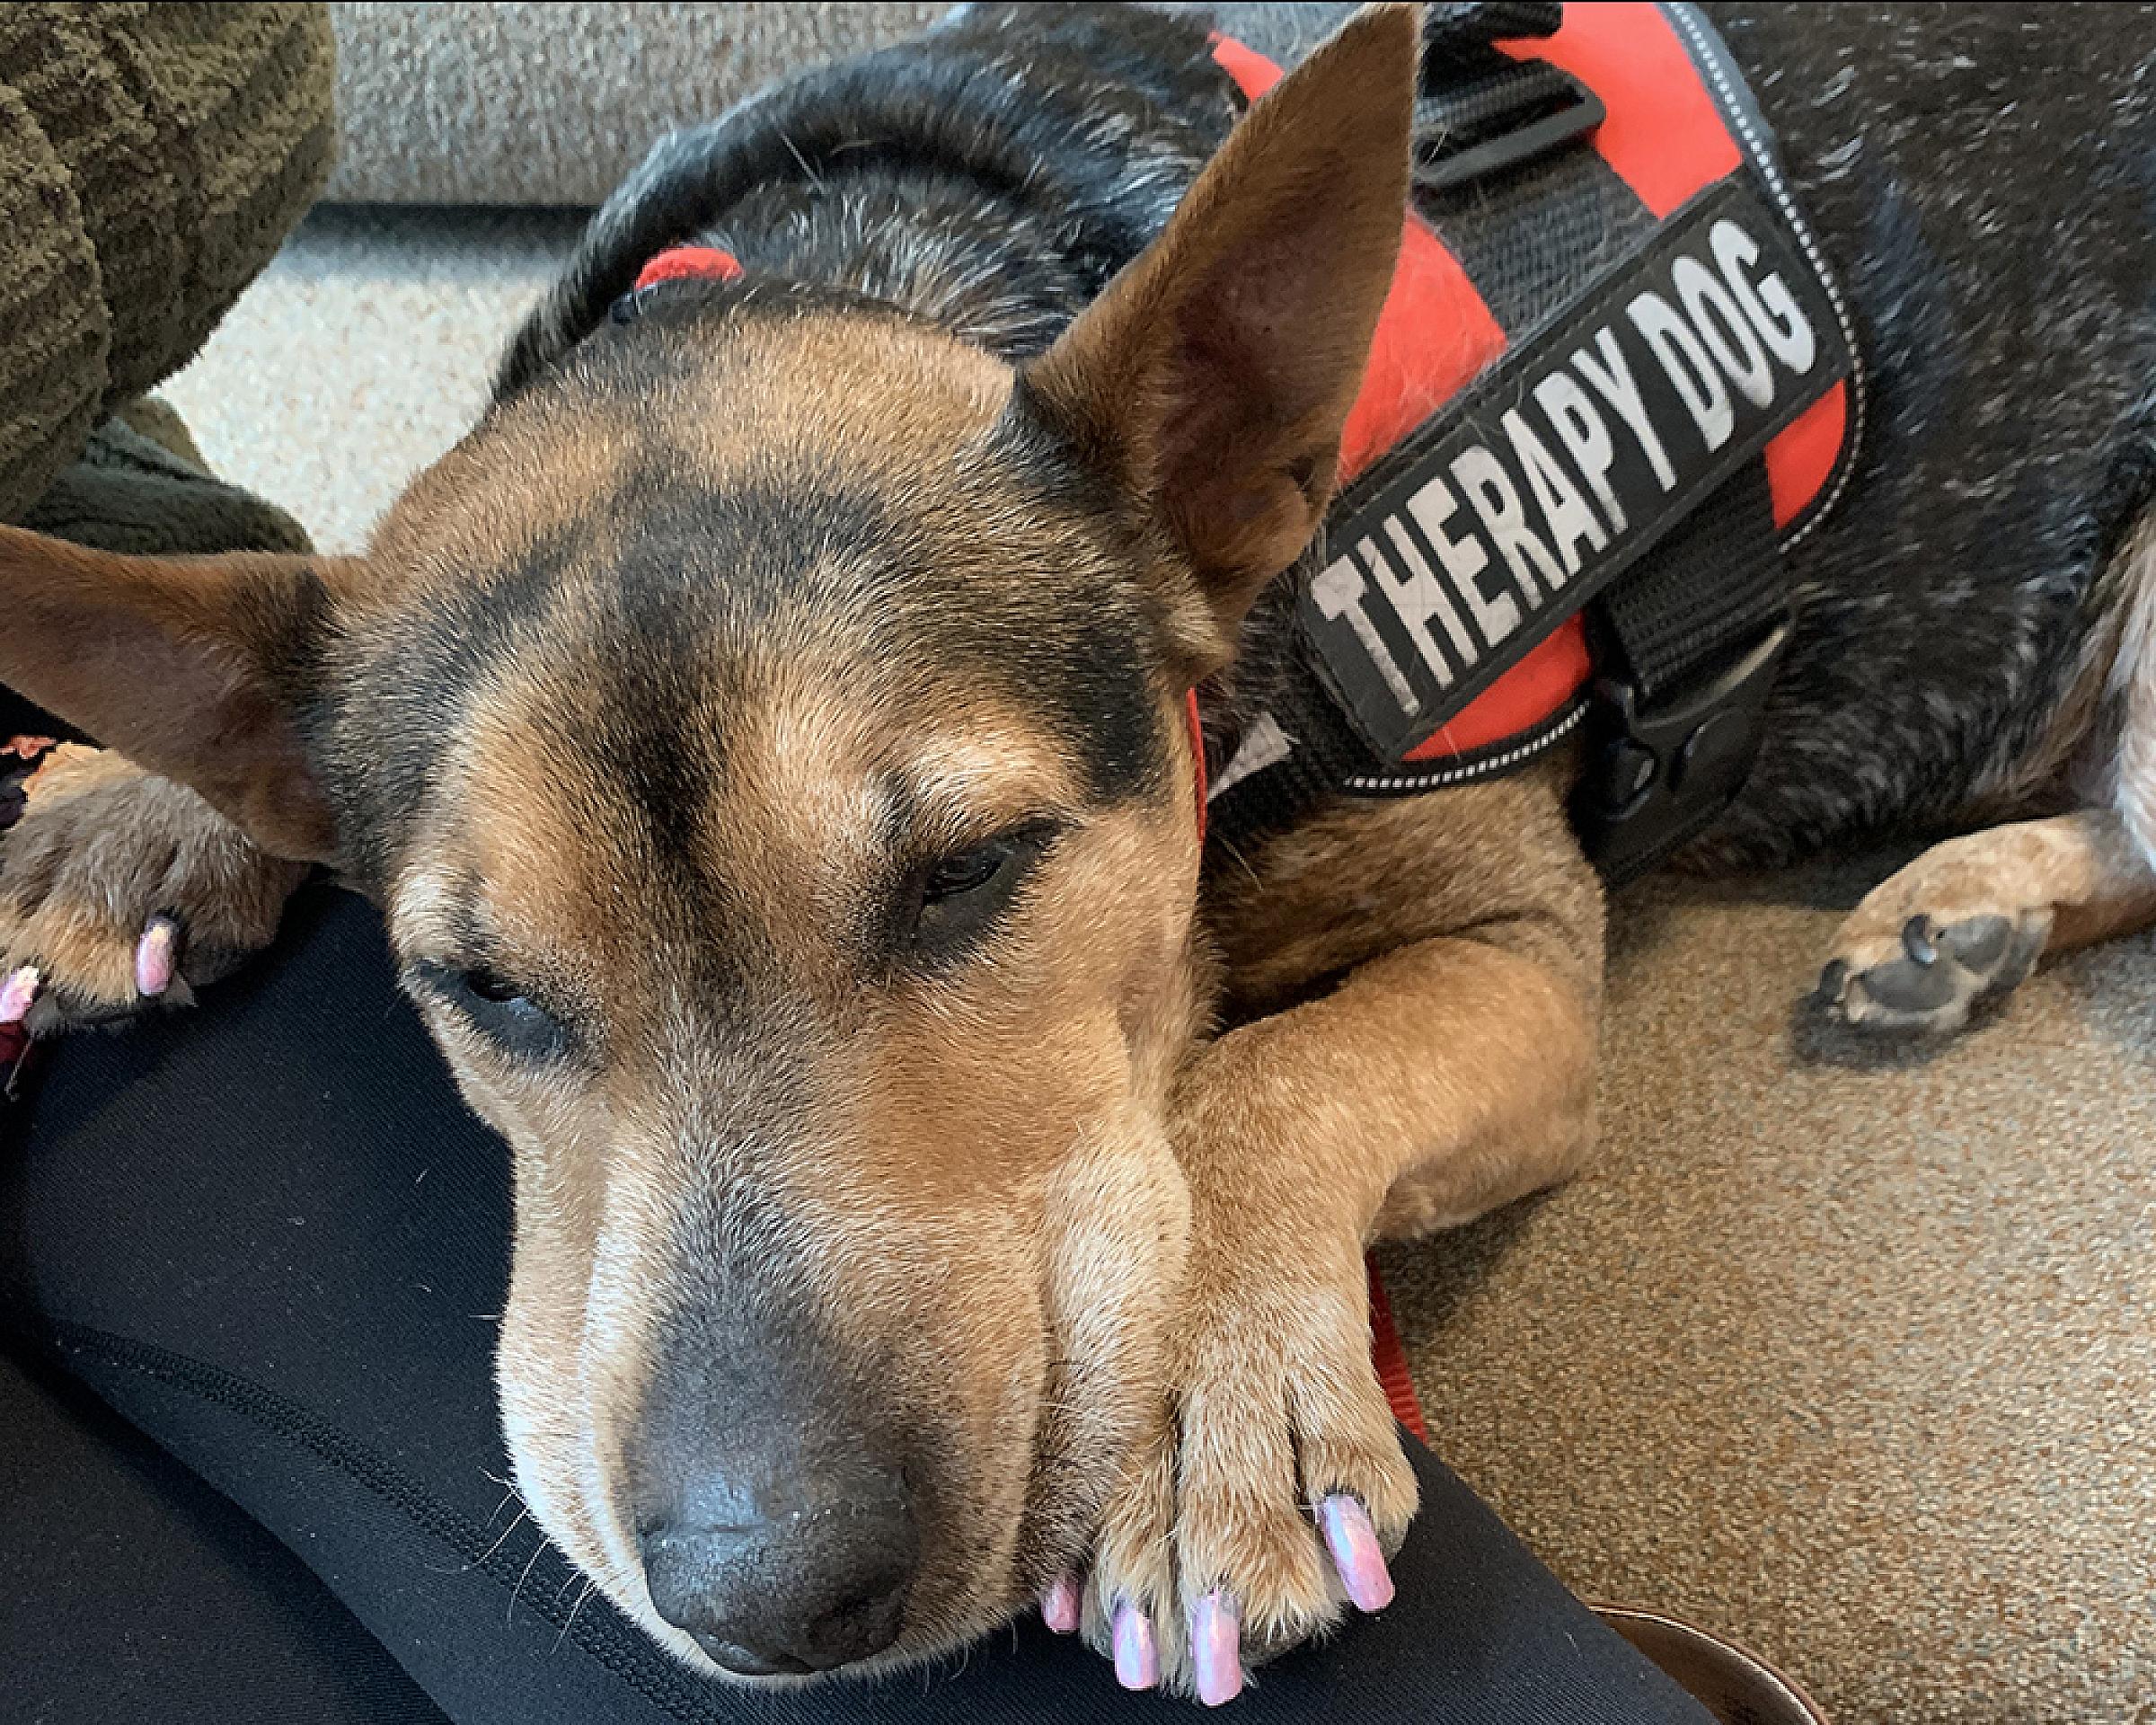 Luna half asleep wearing her Therapy Dog vest and pink nail polish for dogs